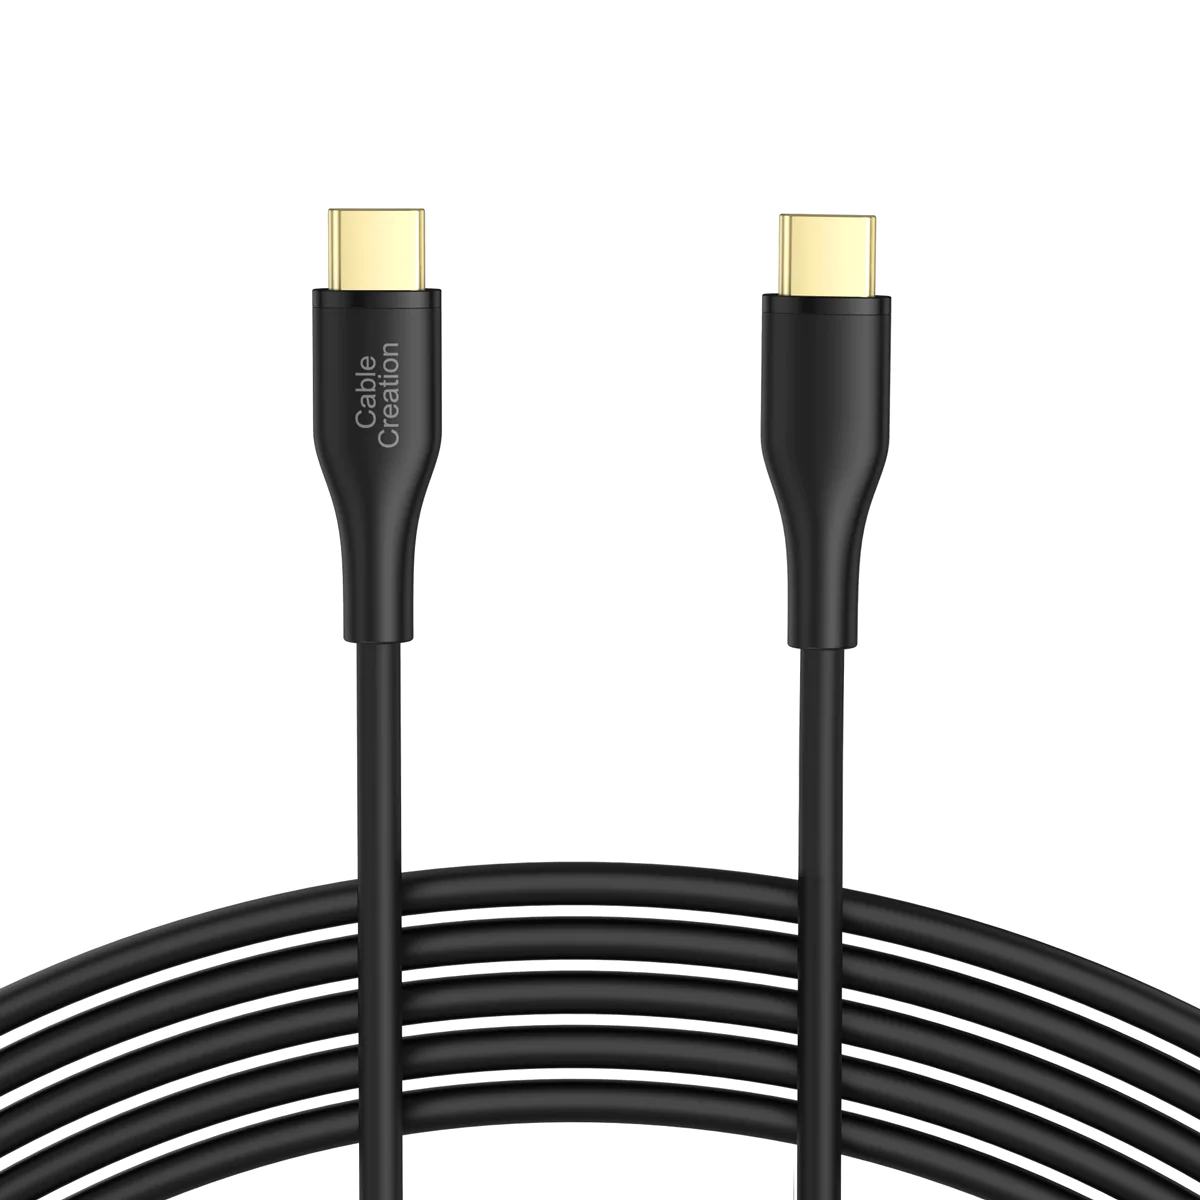 What CableCreation Means for the Charging Cable Industry?